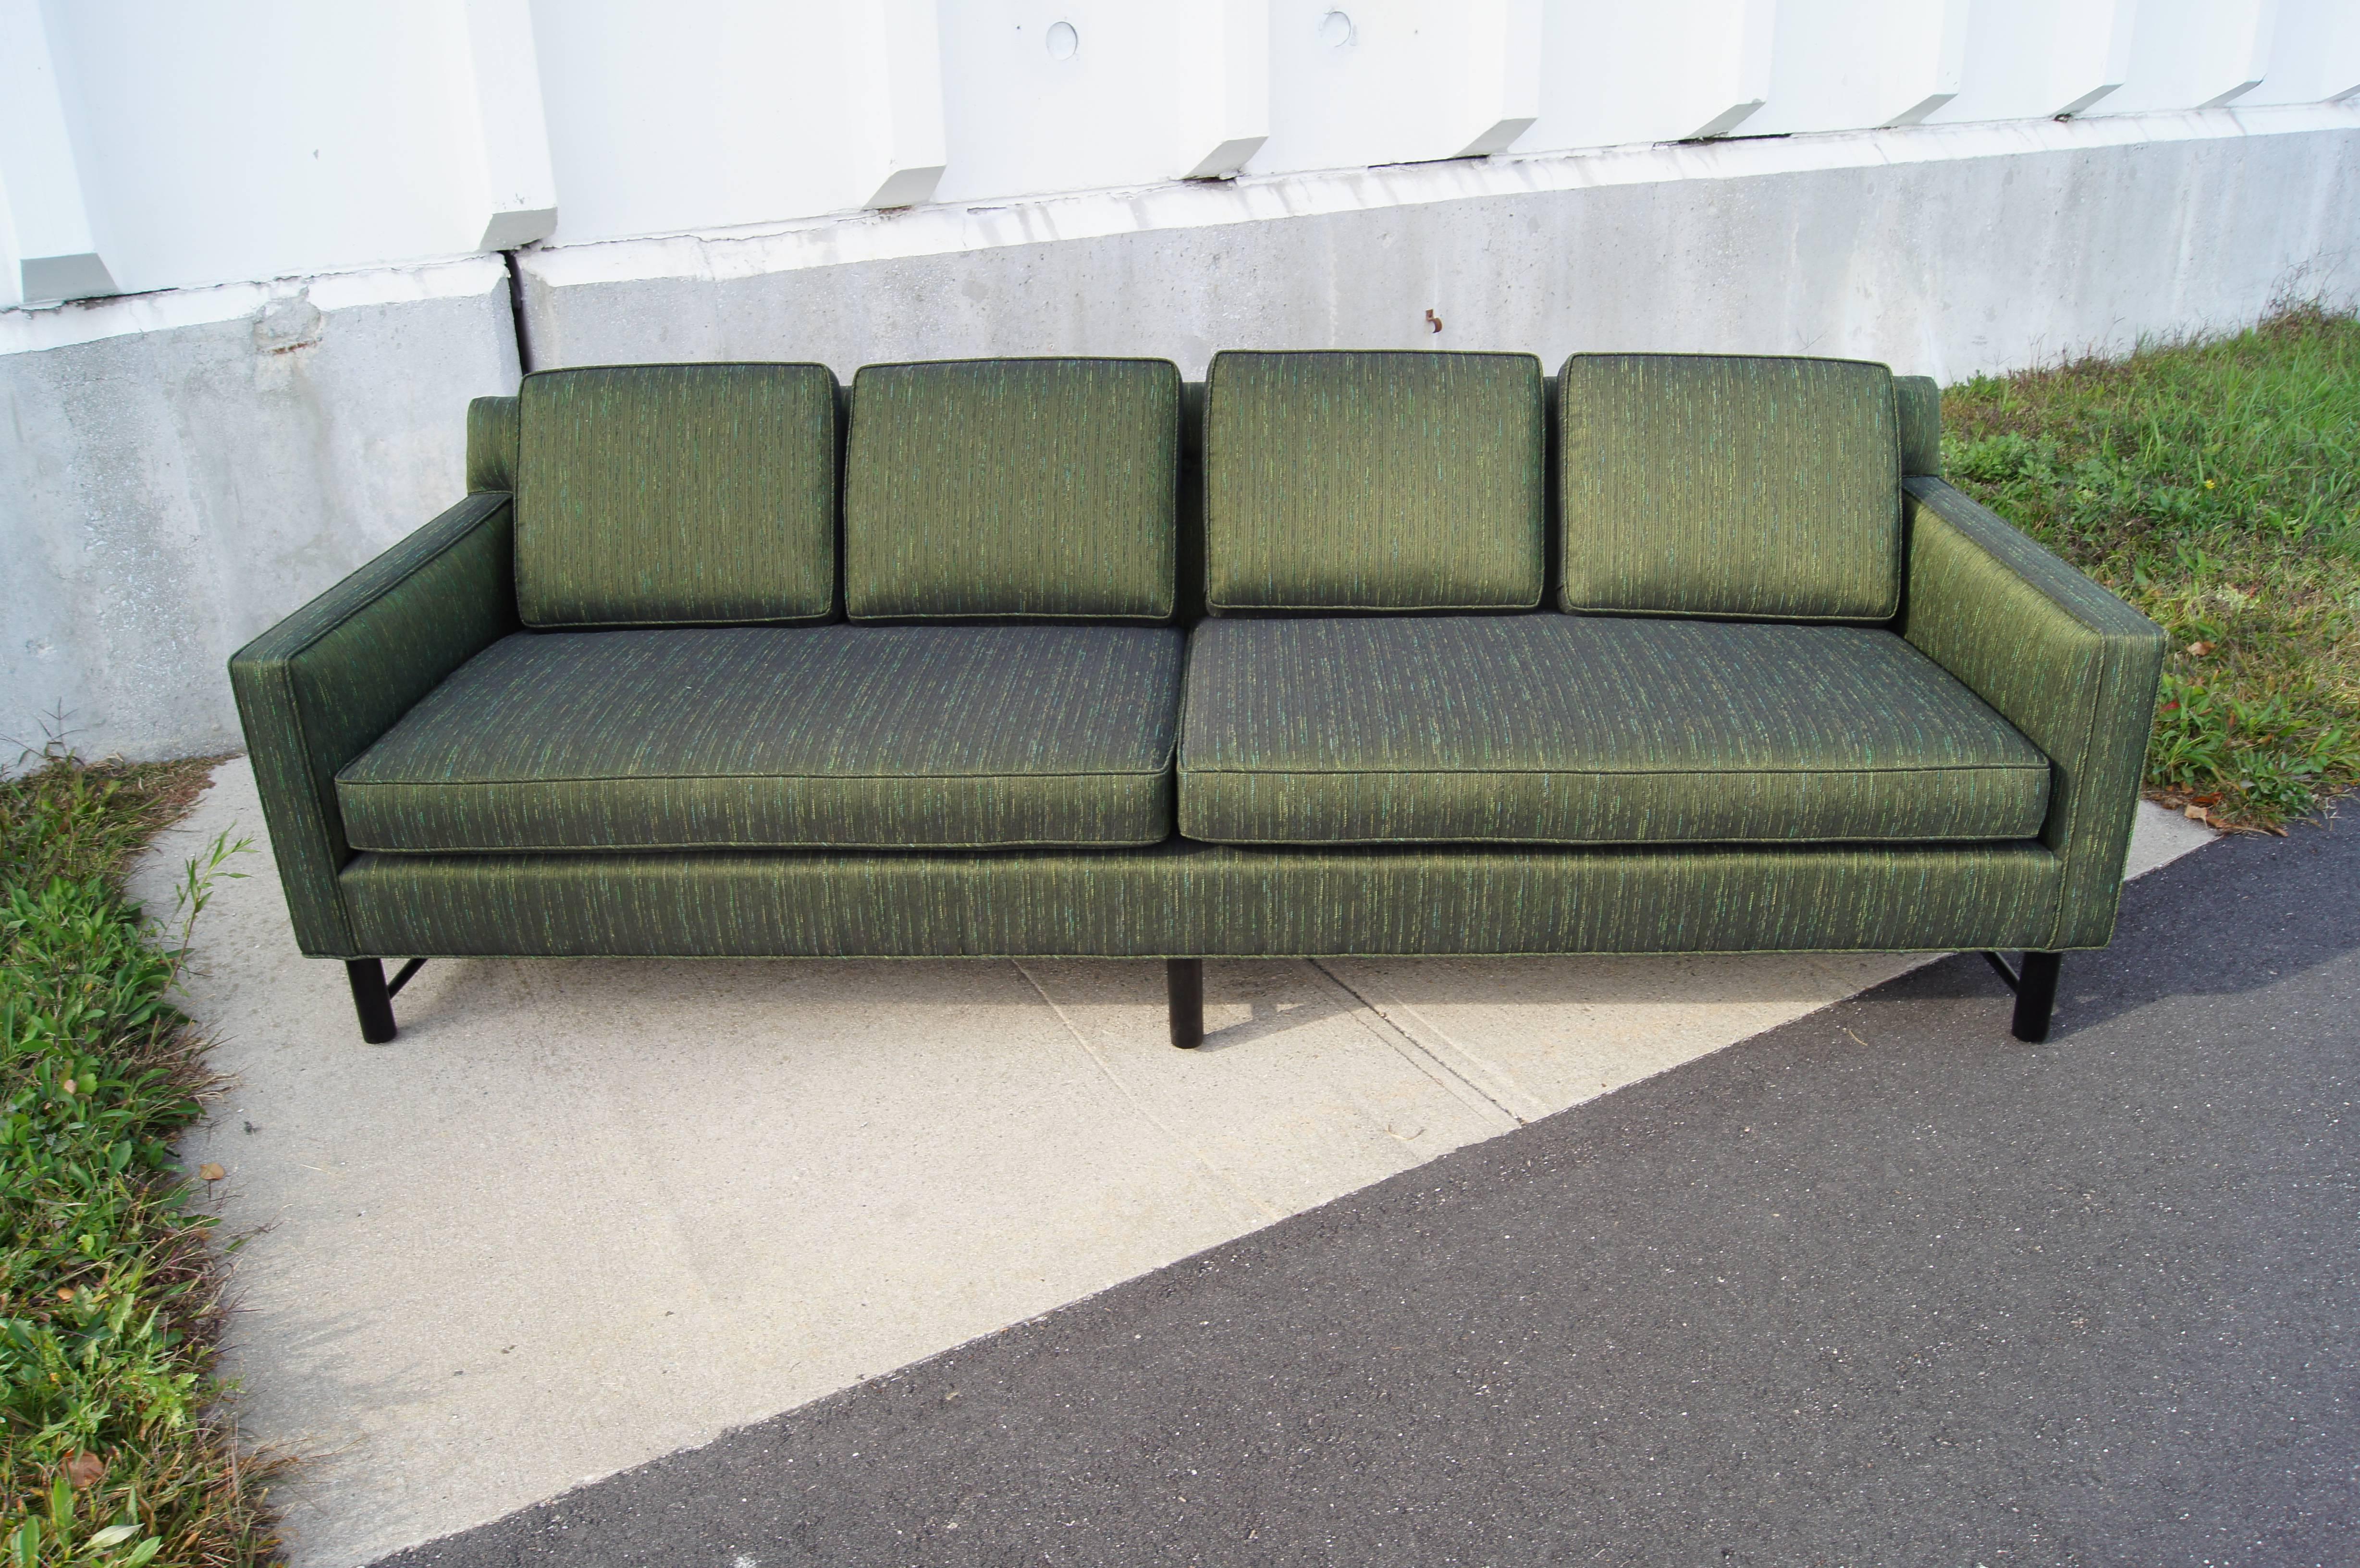 Edward Wormley designed this elegant sofa, model 5138, for Dunbar, with two large seat cushions and four down-filled back pillows.

It has been newly reupholstered in a lustrous sea green textile and its mahogany base expertly refinished and